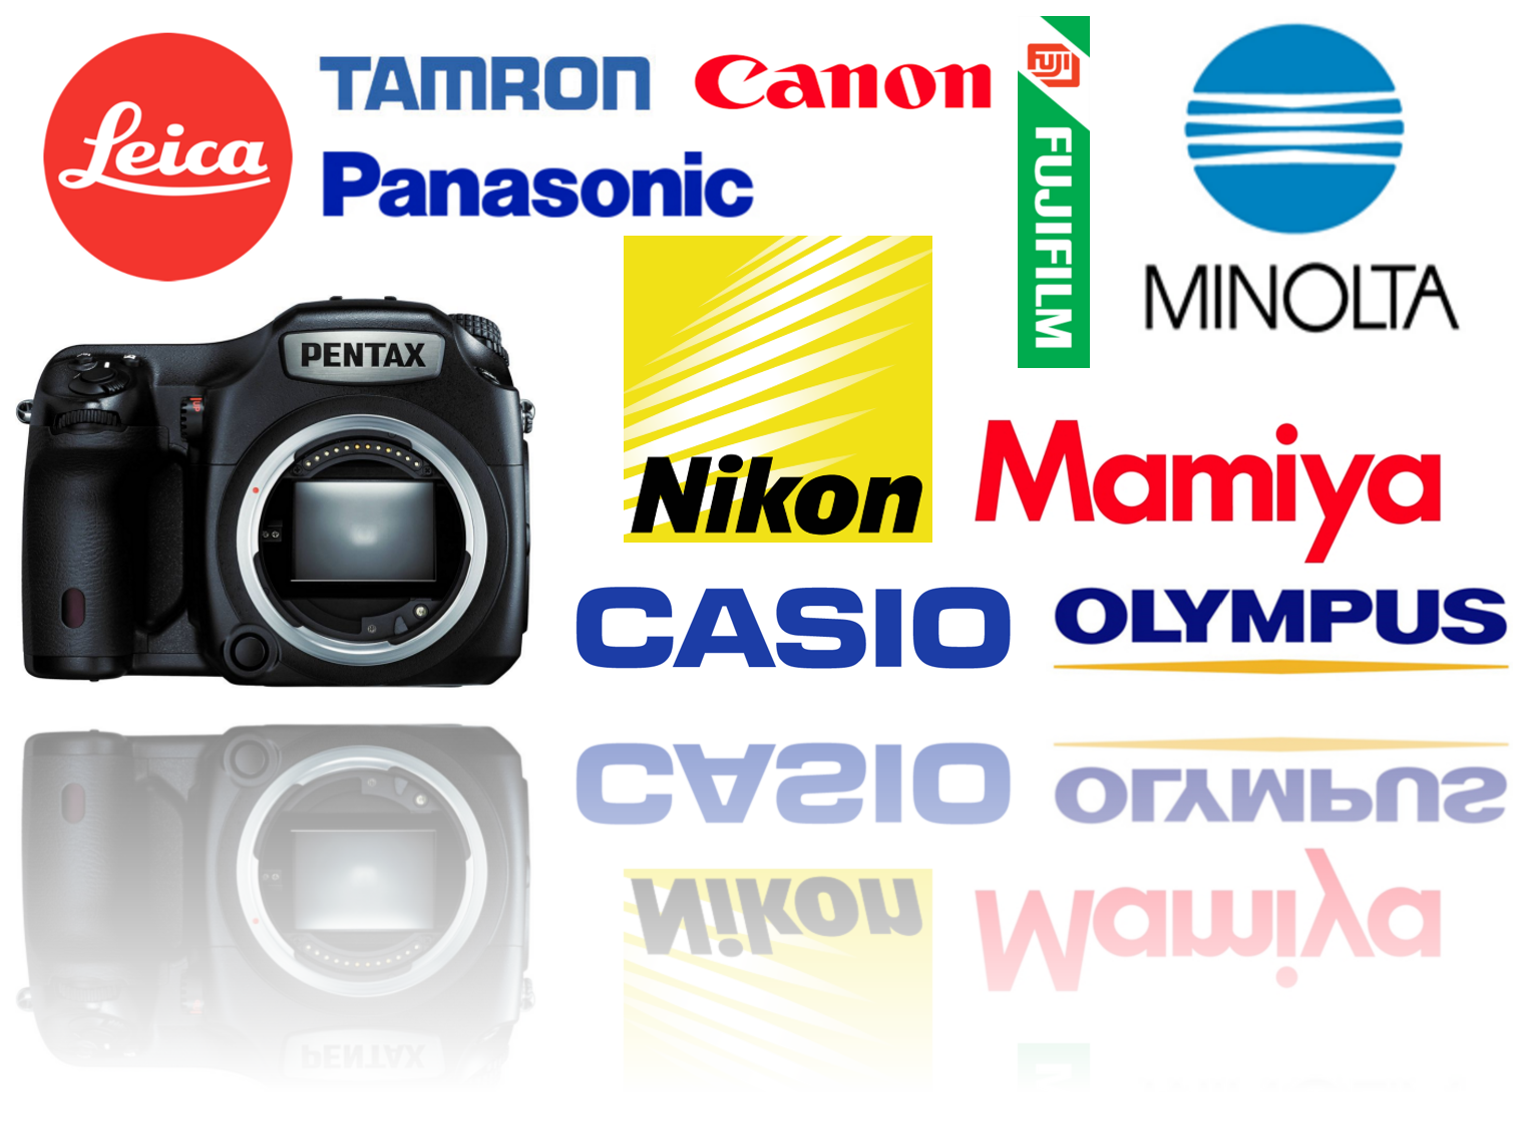 Take Focus - CAMERA LENSES of Japanese Top Brands through Auction